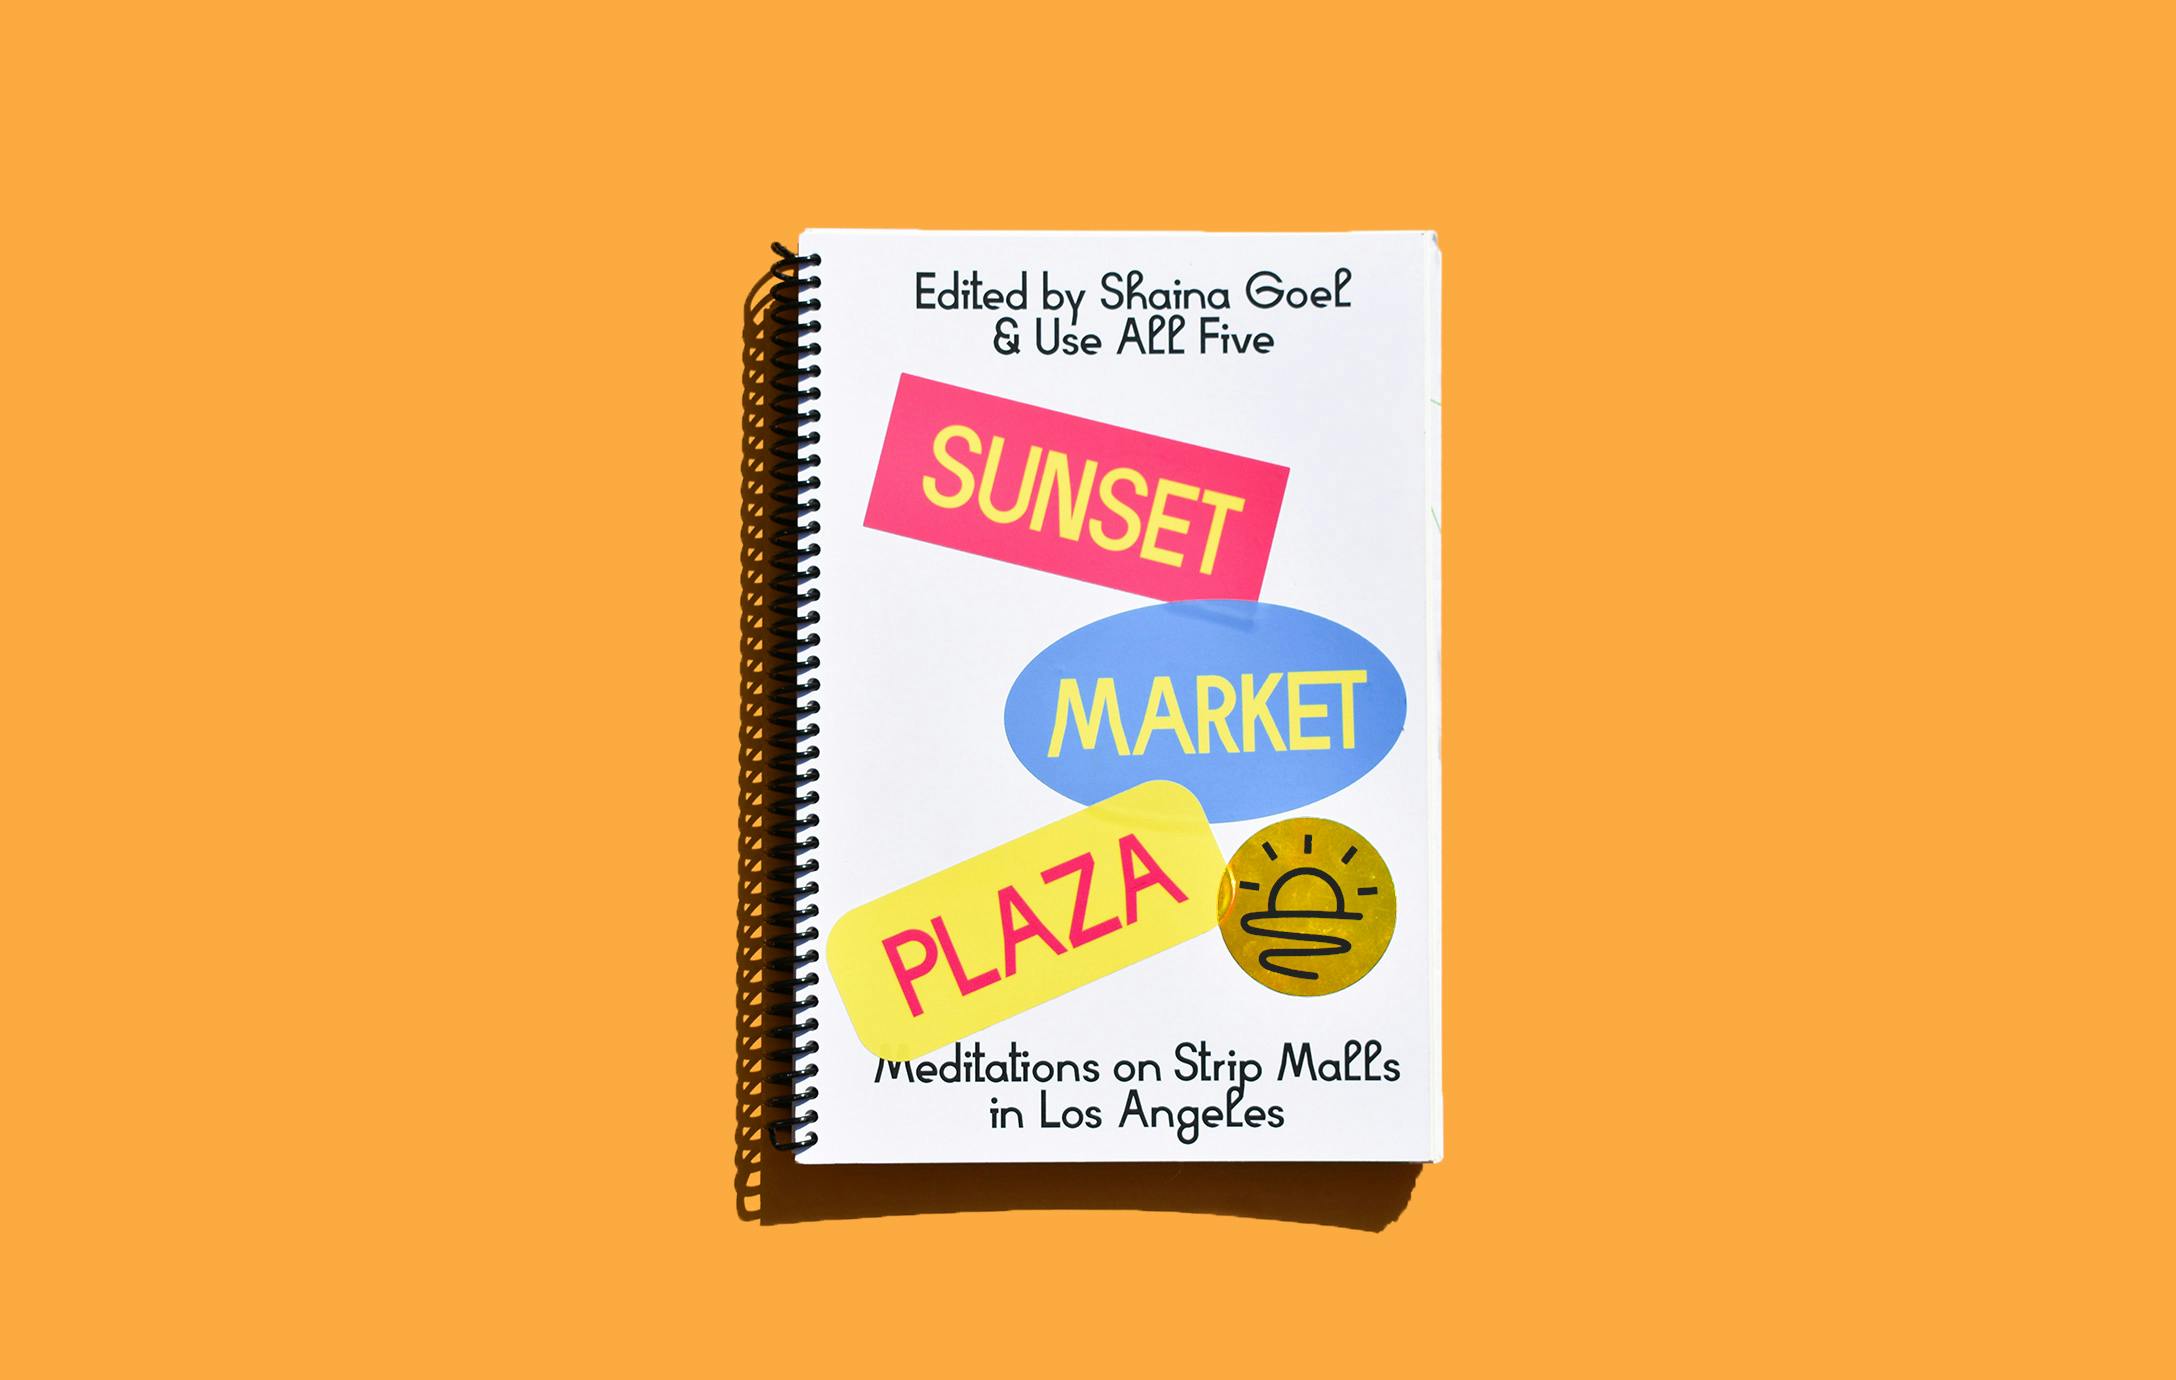 A notebook with Sunset Maket Plaza stickers on it